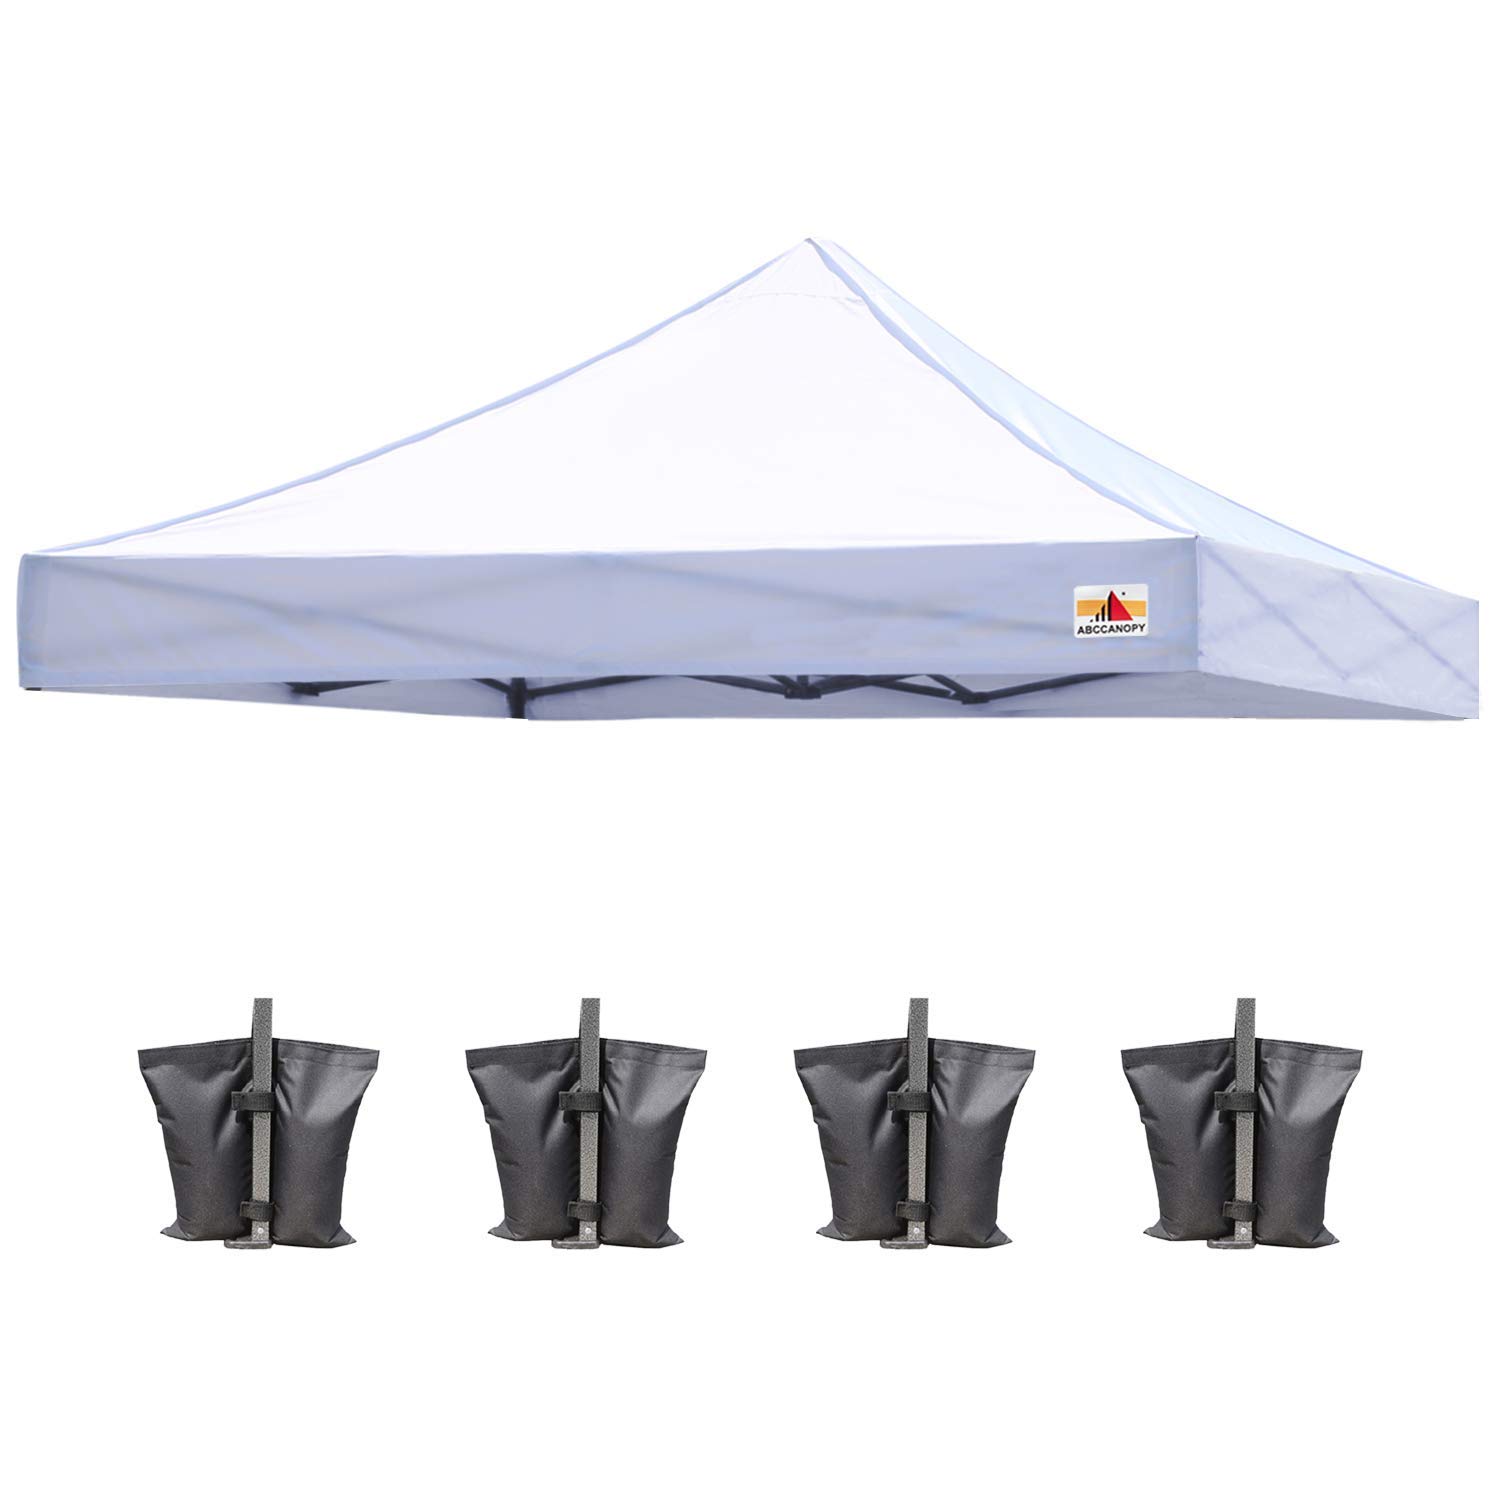 ABccANOPY Replacement canopy Top for Pop Up canopy Tent (8x8, White)